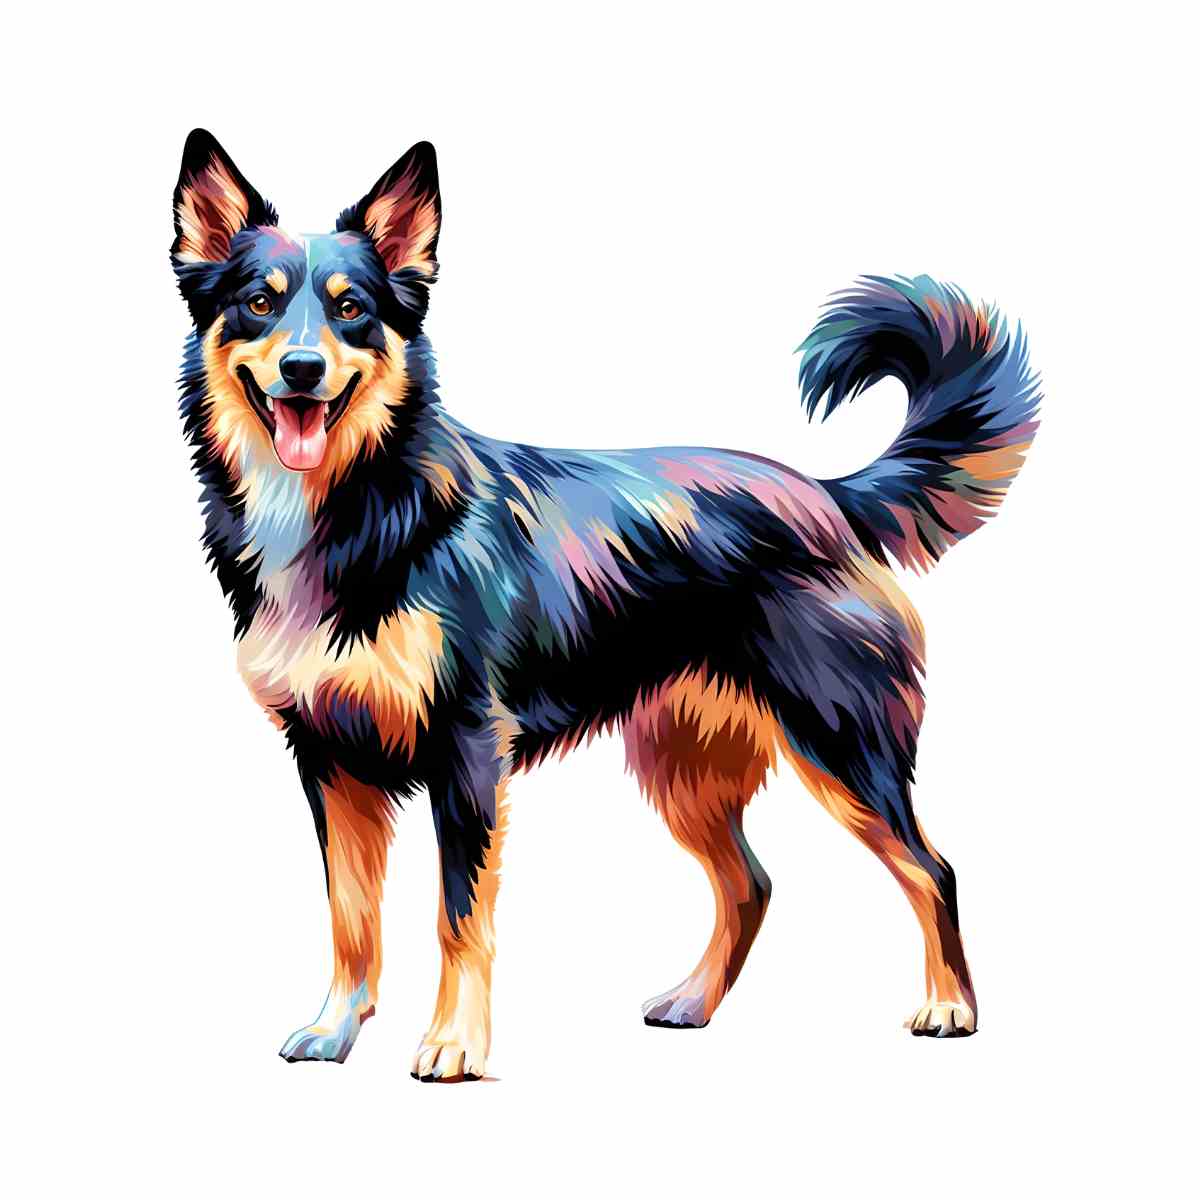 Animal Jigsaw Puzzle > Wooden Jigsaw Puzzle > Jigsaw Puzzle A4 Australian Kelpie Dog - Jigsaw Puzzle